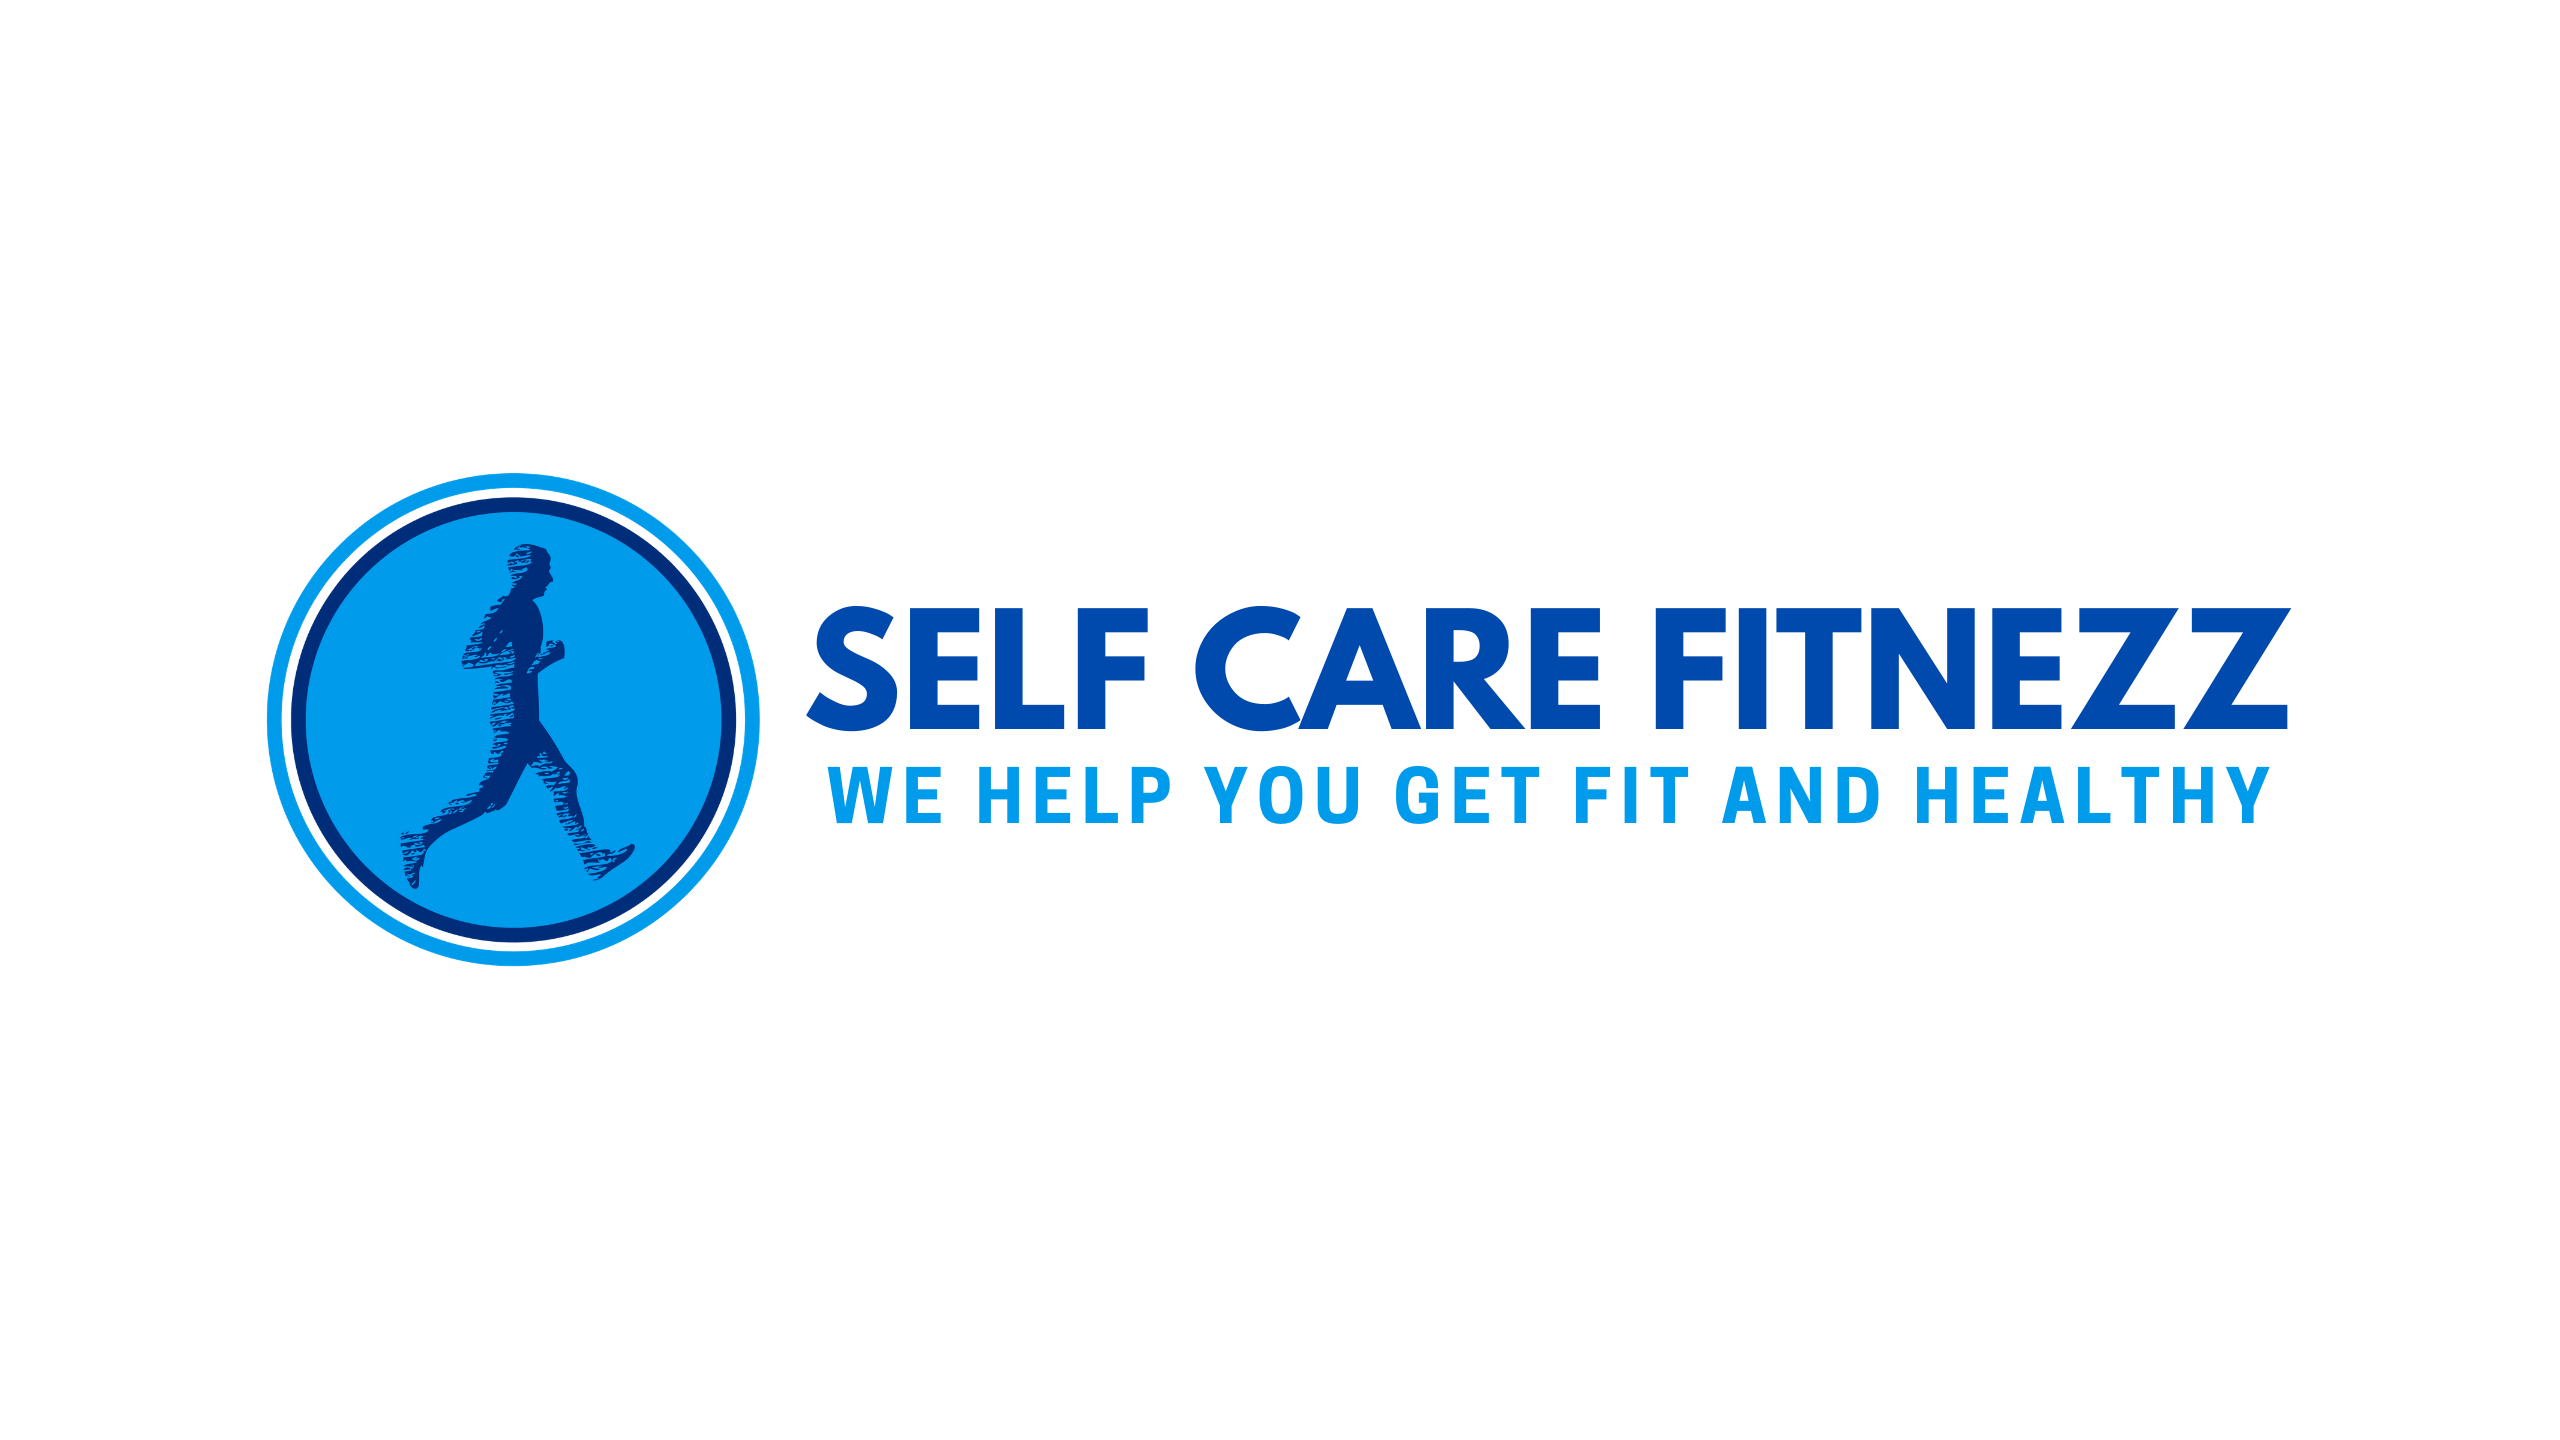 Self Care Fitnezz: Best Home Gym Equipment Online